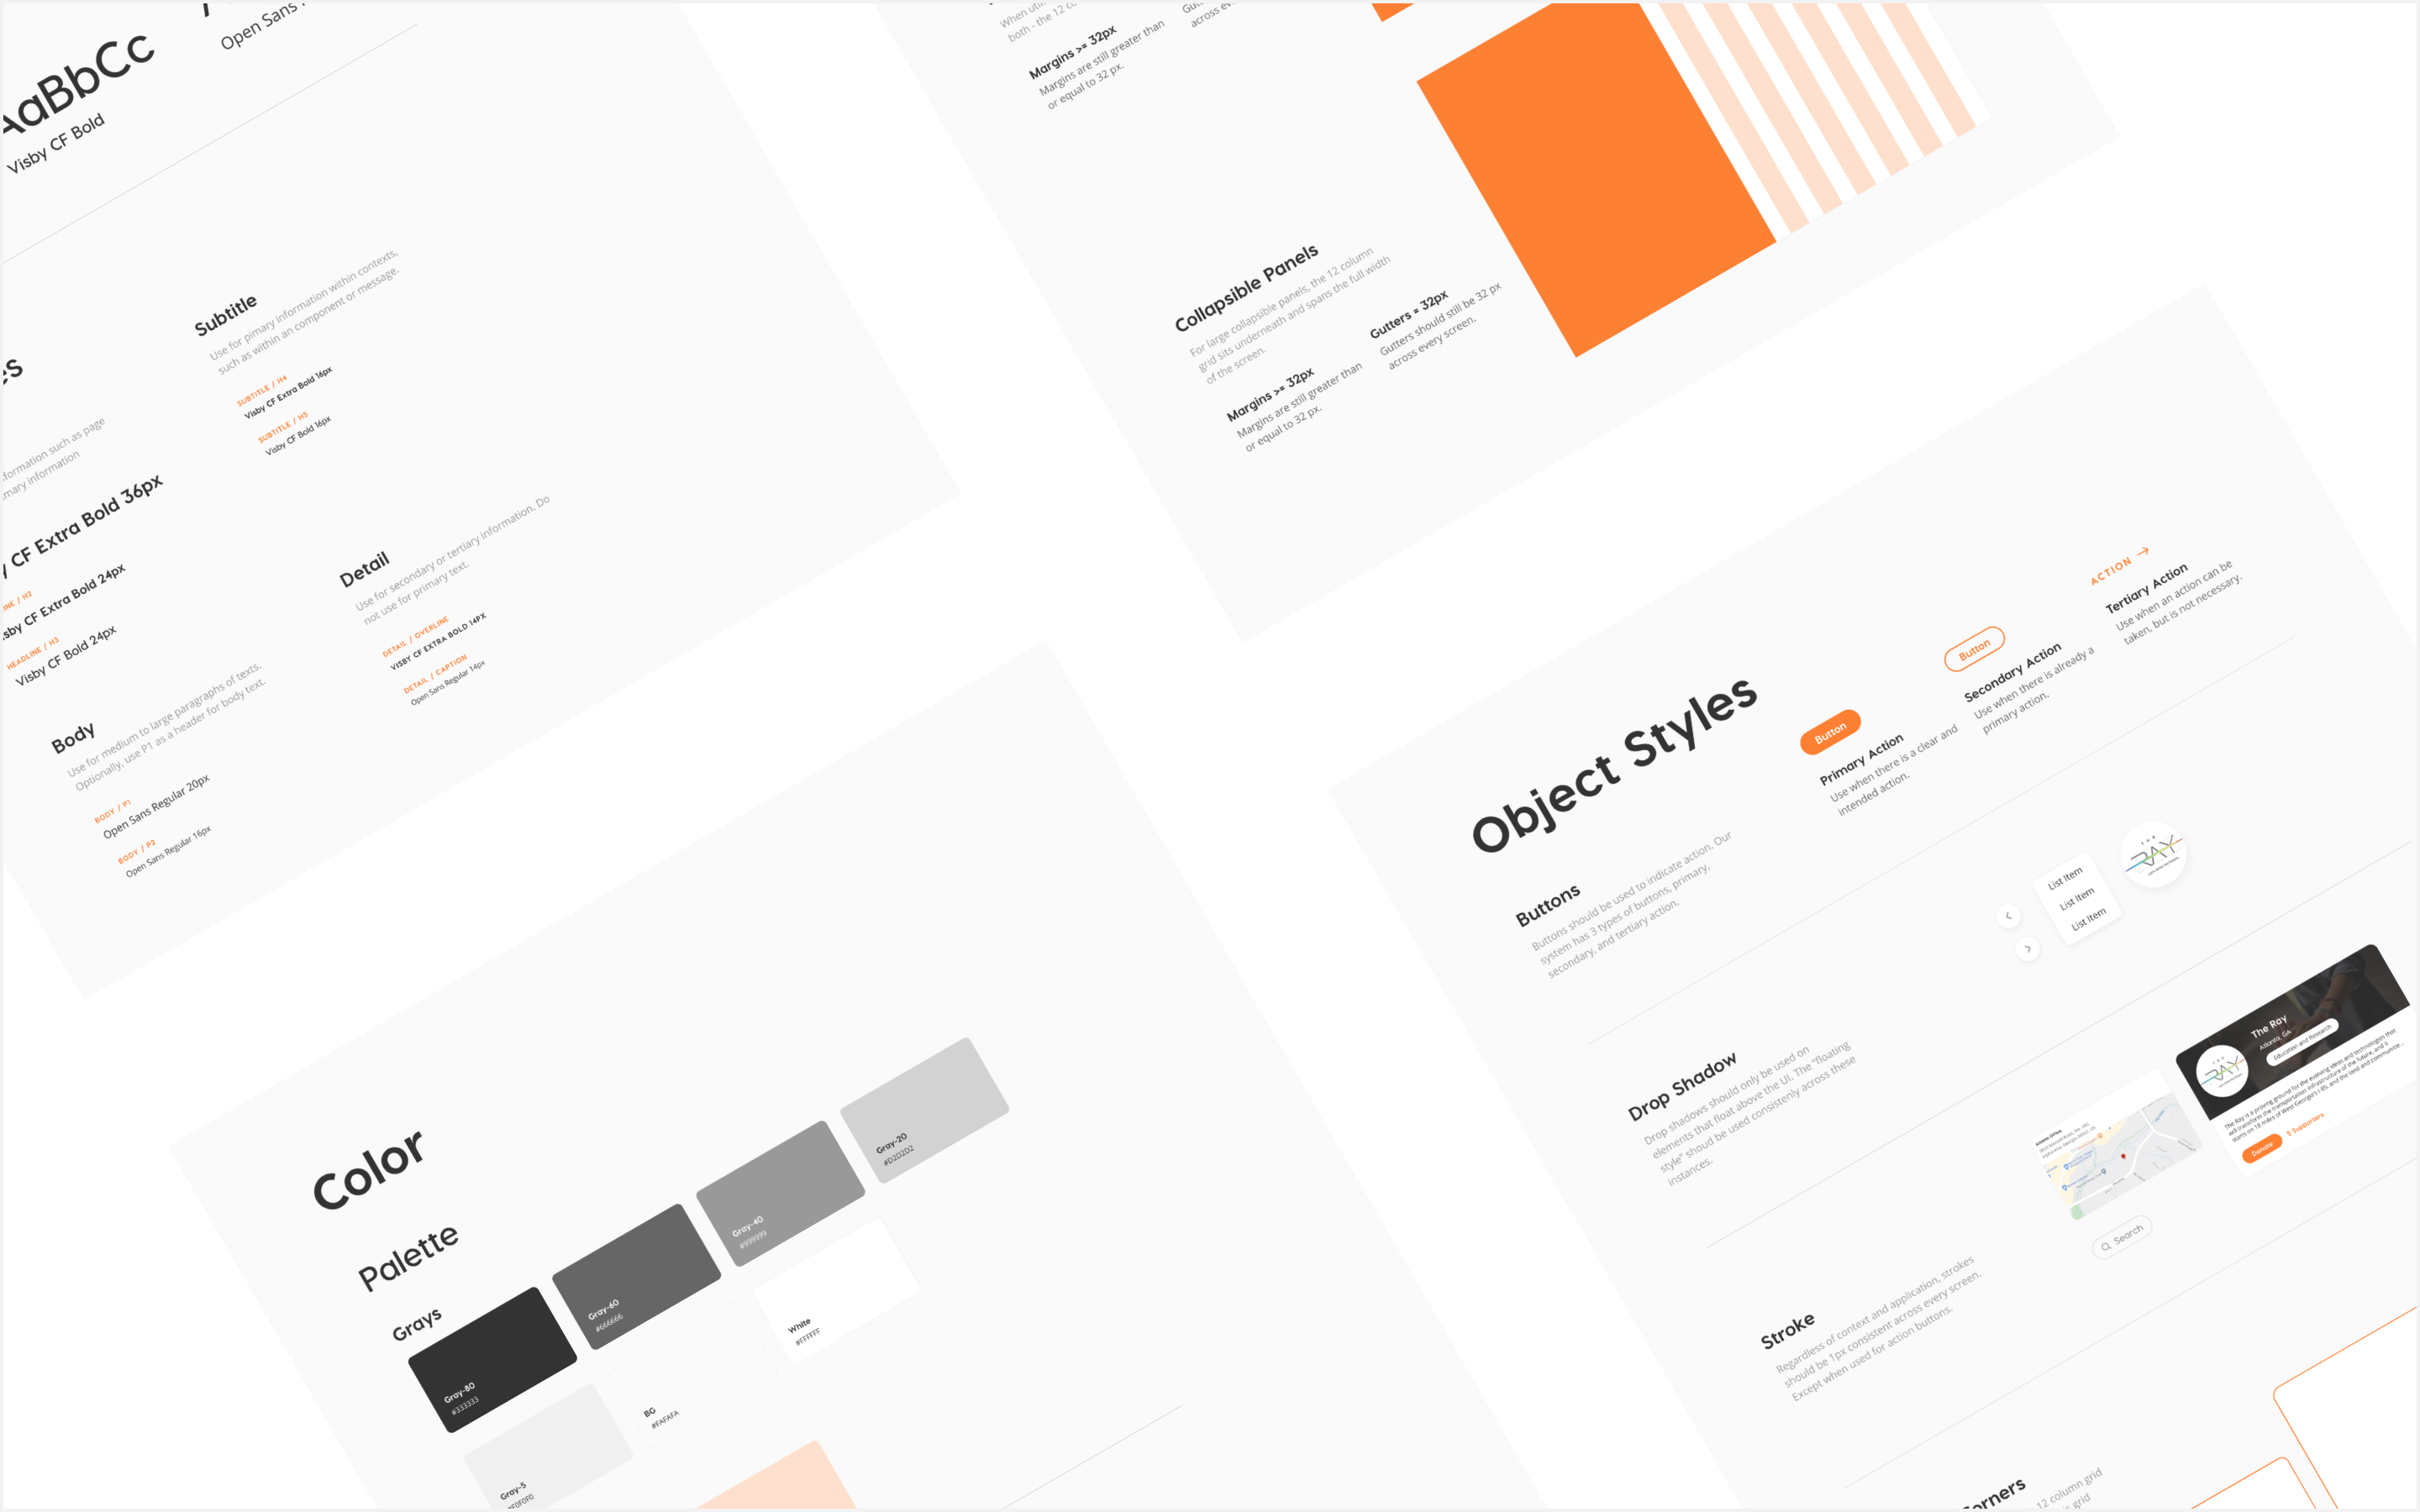 Overview of the design system used for this product. Shows highlight of color, type, grid, and object style system.